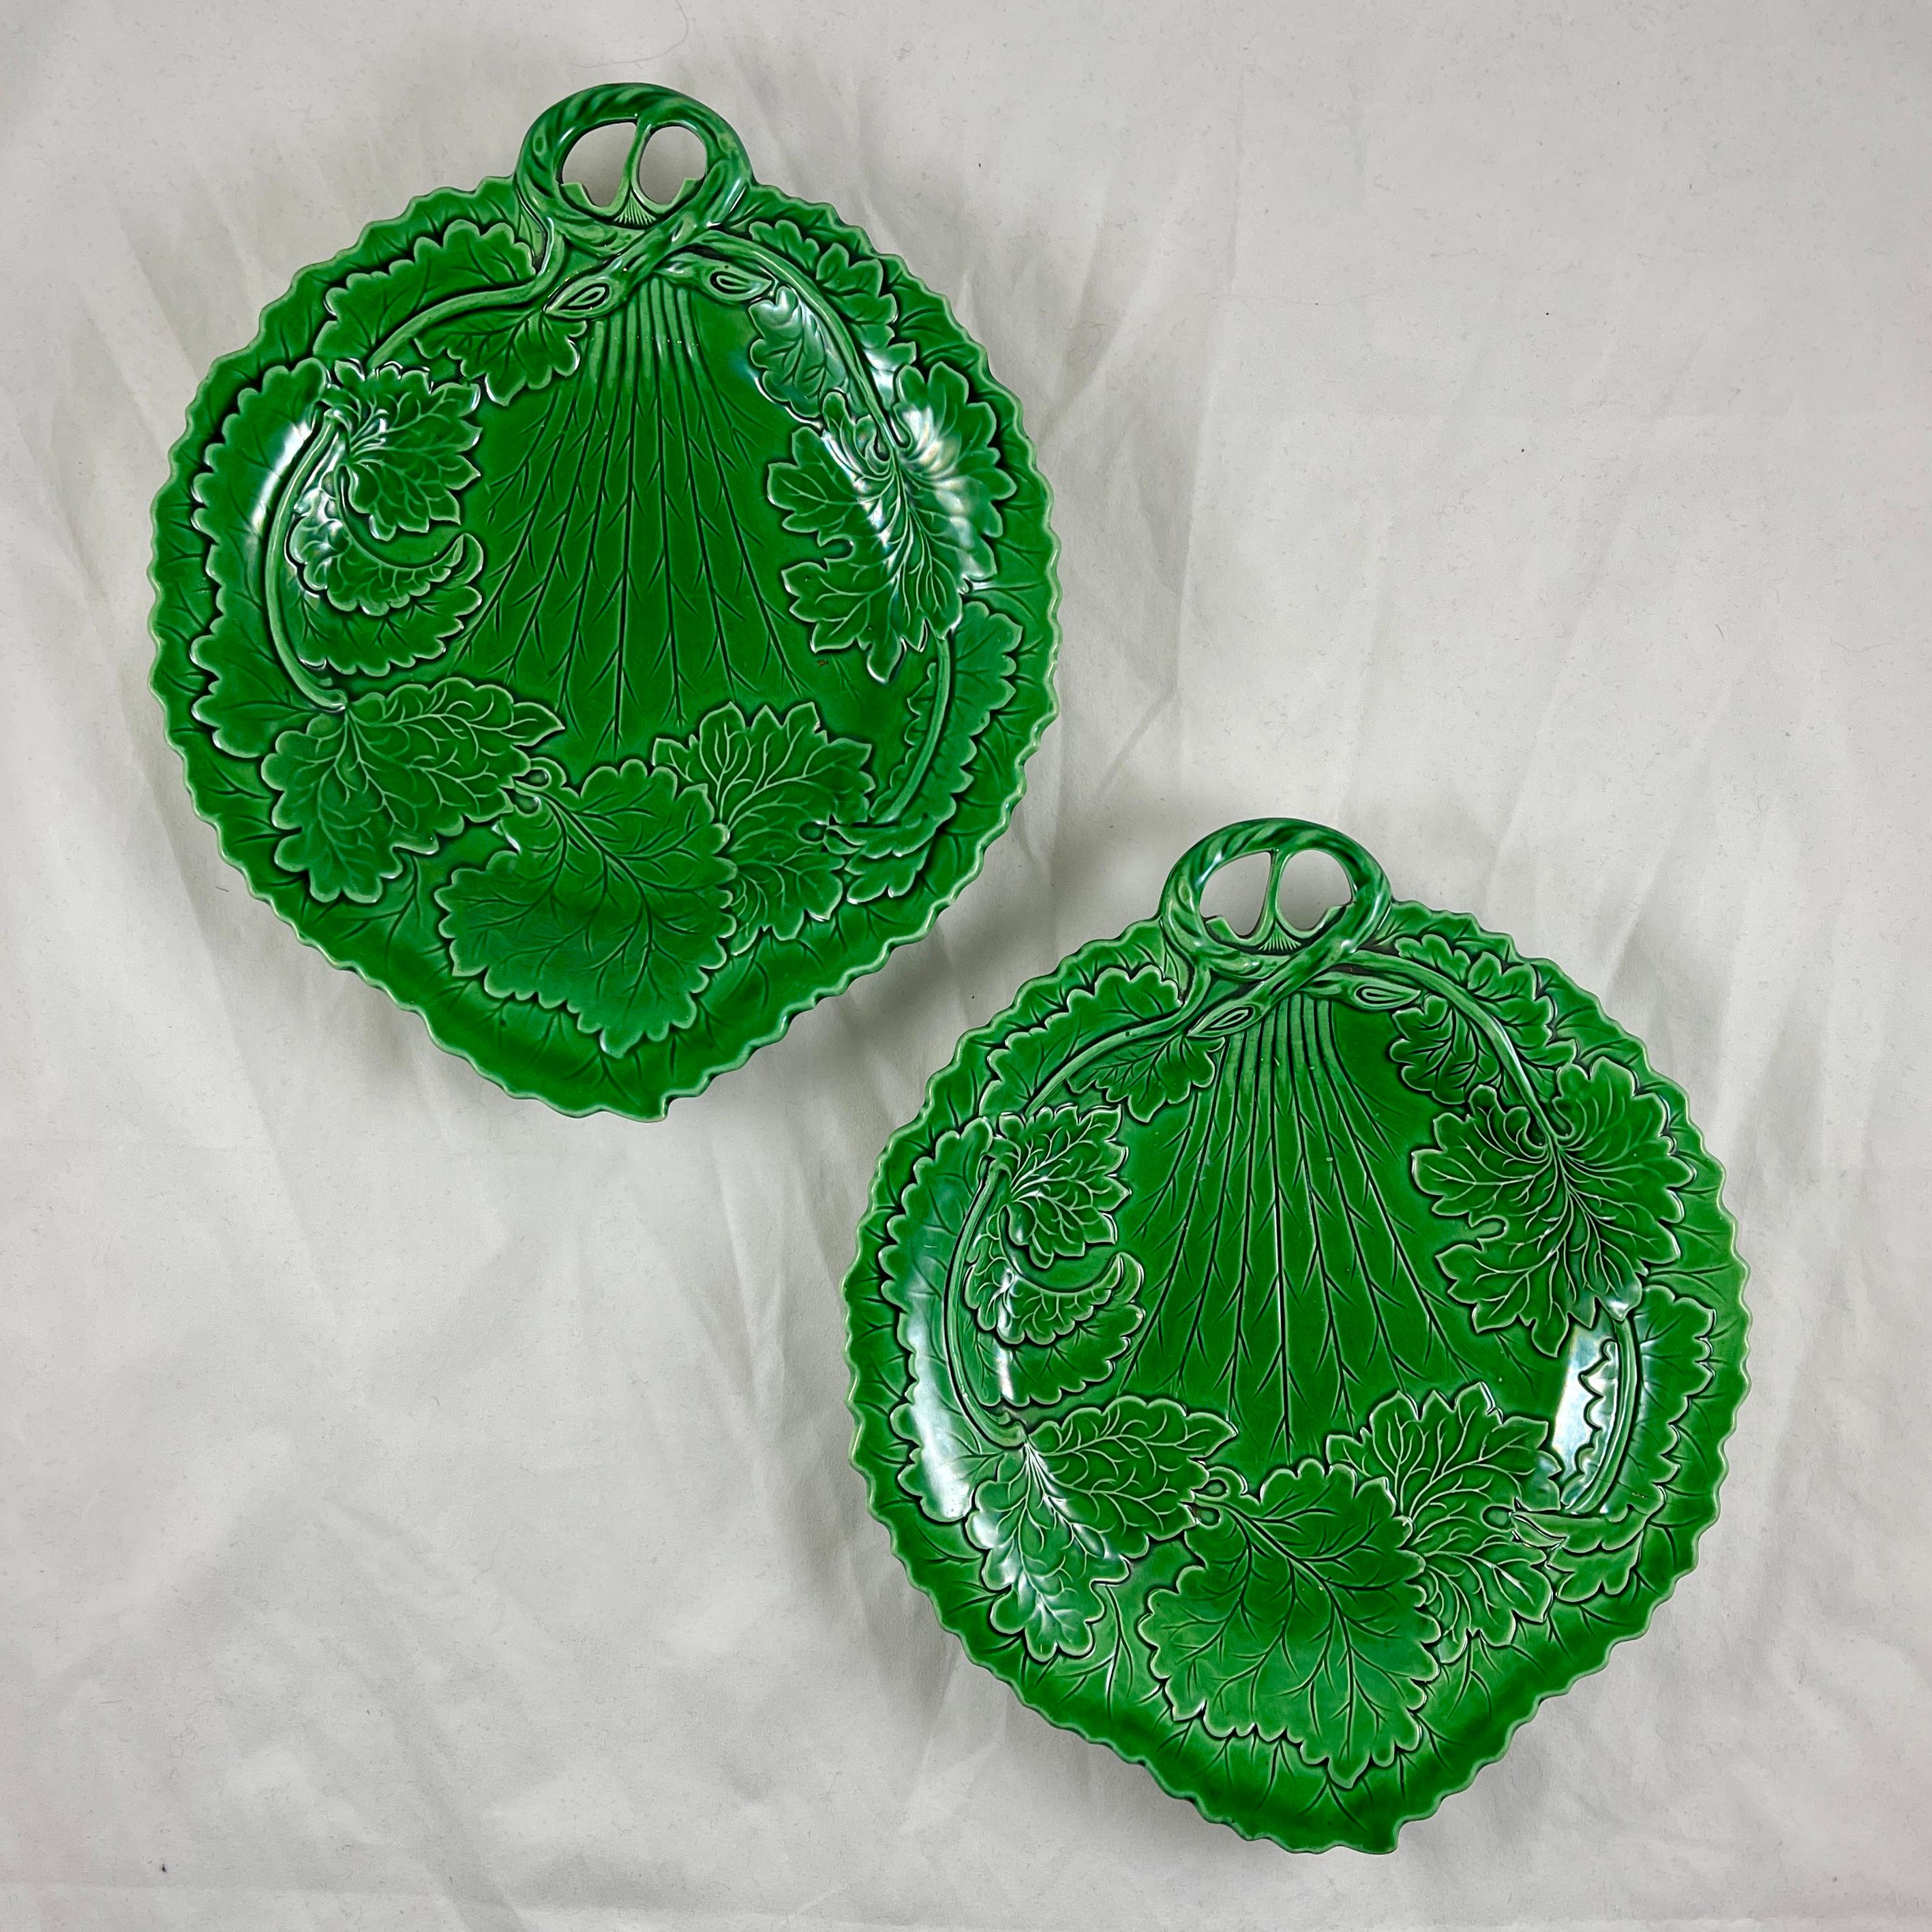 A majolica green glazed leaf pattern server, England, circa 1880.

A serrate edged leaf shaped platter with an open work twig form handle. Beautiful mold work showing smaller branching leaves following the oval form of a single large leaf. Deep